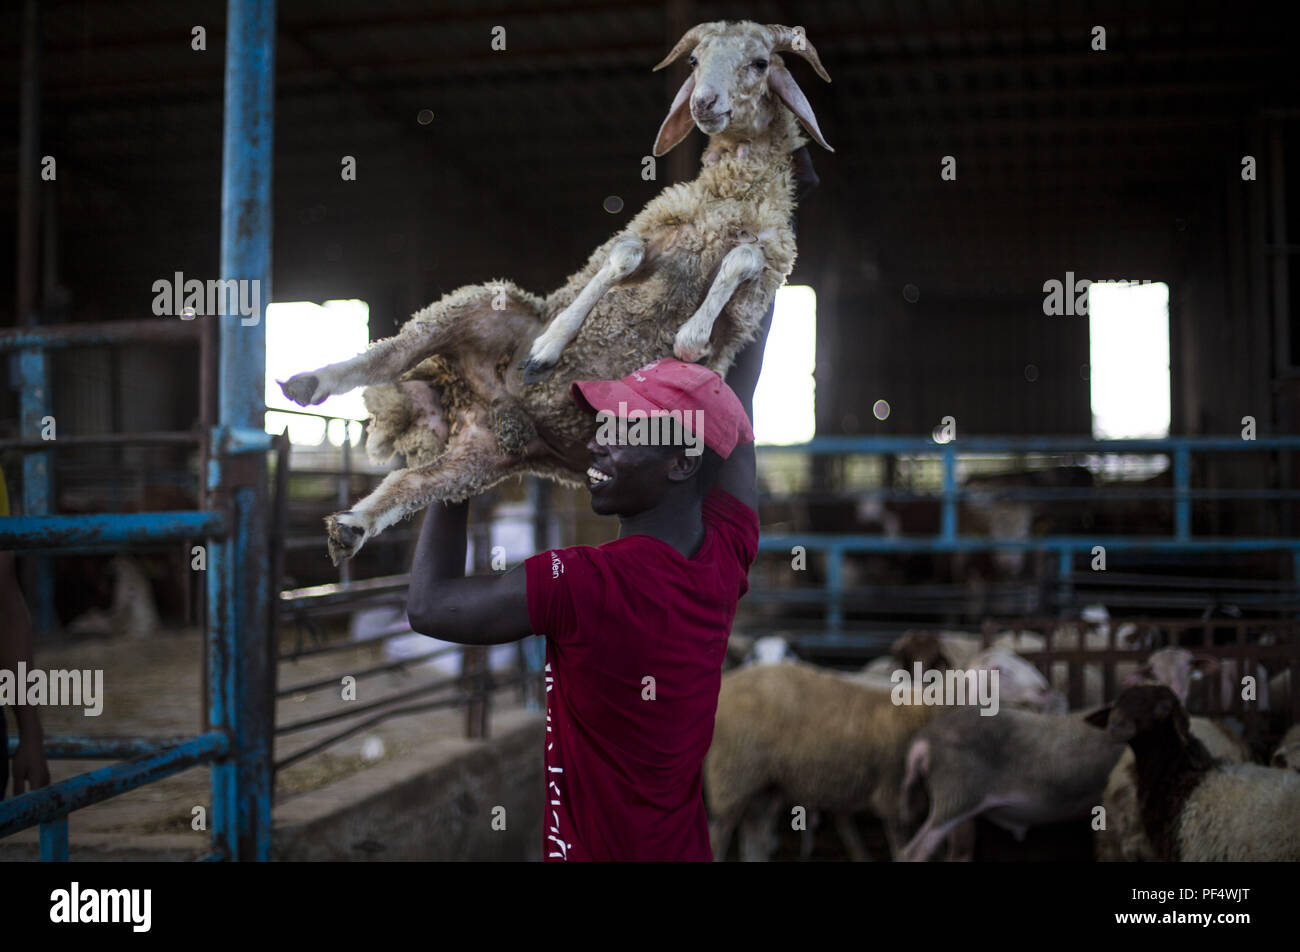 Gaza City, The Gaza Strip, Gaza. 18th Aug, 2018. A farmer seen with a goat at the cattle shop.Palestinians gather in a cattle shop to purchase cattles to be sacrificed. before Eid al-Adha in the east of Jabalya refugee camp. Eid al-Adha (Festival of Sacrifice) is celebrated throughout the Islamic world as the commemoration of Abraham's will to sacrifice his son for God, cows, camels, goats and sheep are traditionally slaughtered on the Holy Day. Credit: Mahmoud Issa/SOPA Images/ZUMA Wire/Alamy Live News Stock Photo